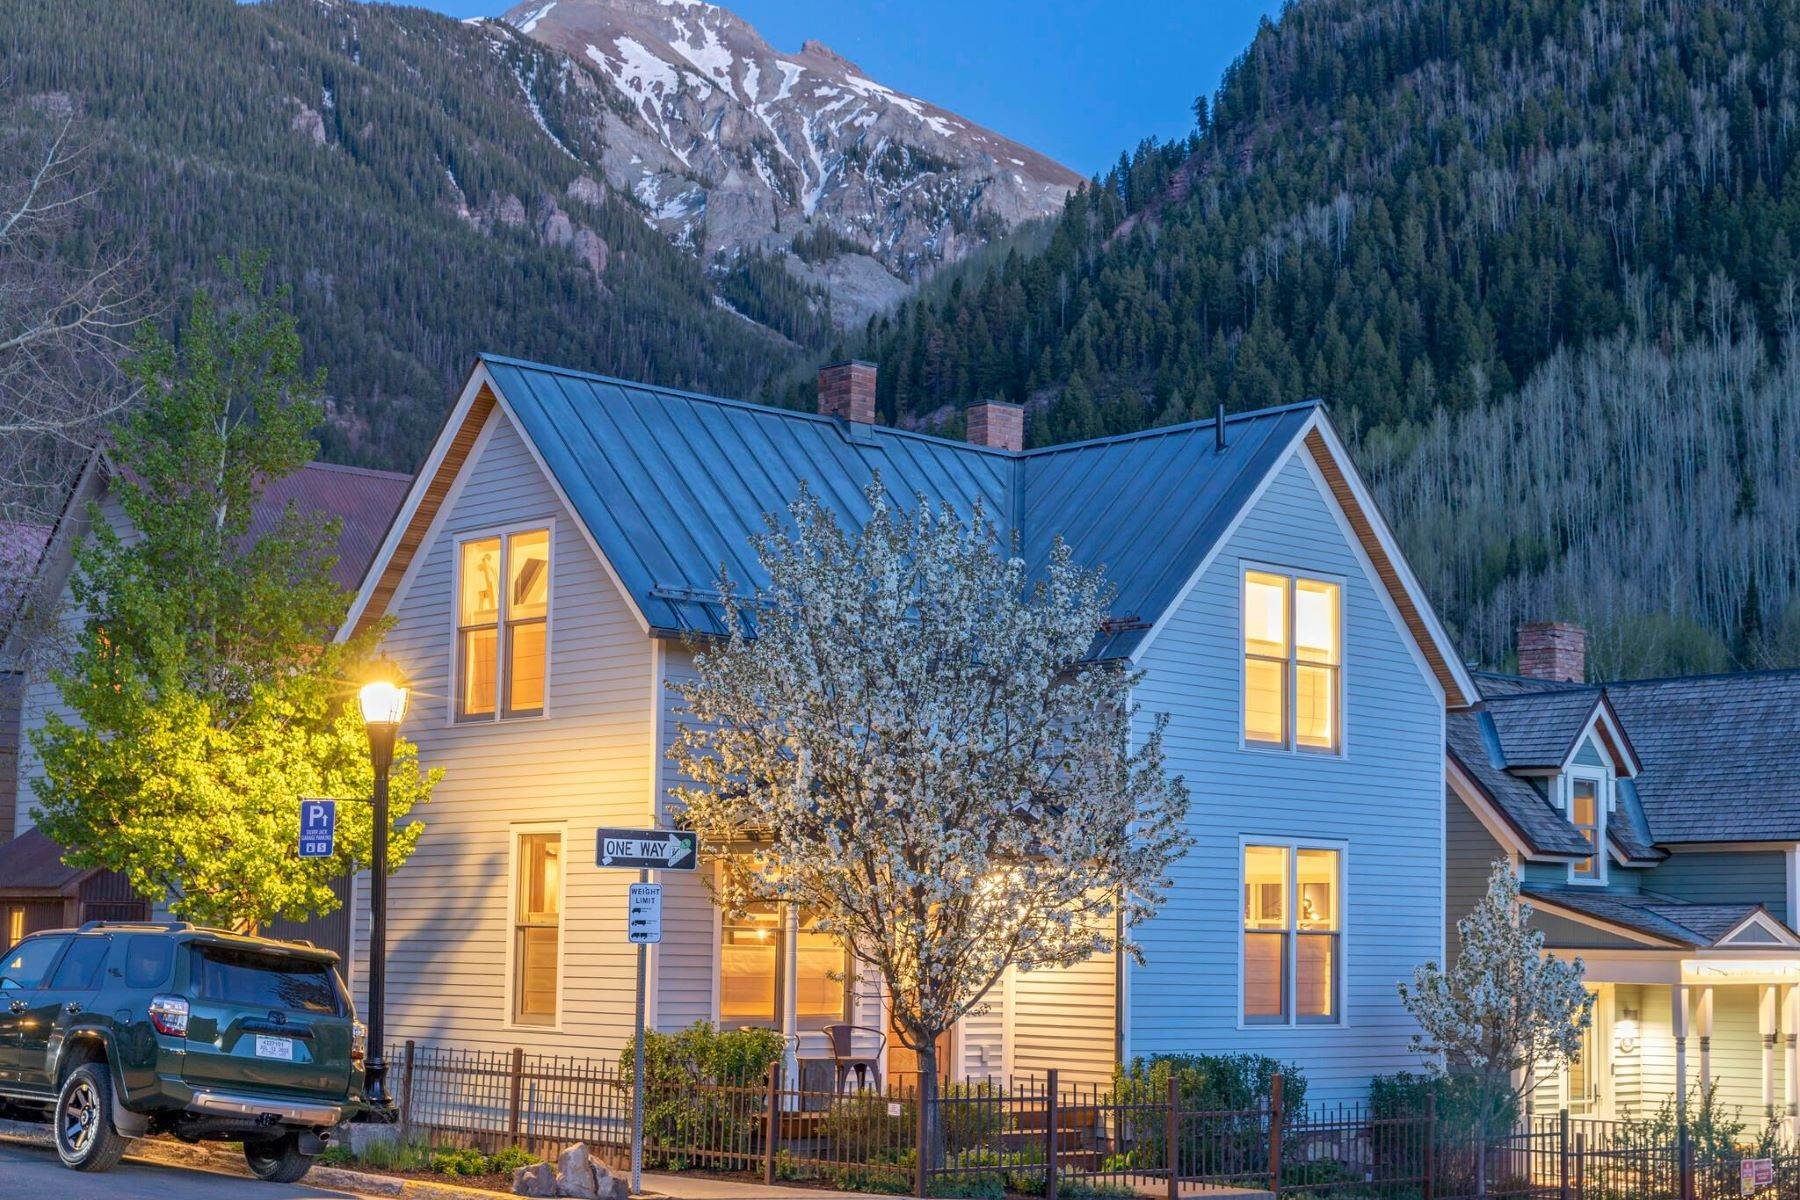 Single Family Homes for Active at 200 South Oak Street, Telluride, CO 81435 200 South Oak Street Telluride, Colorado 81435 United States